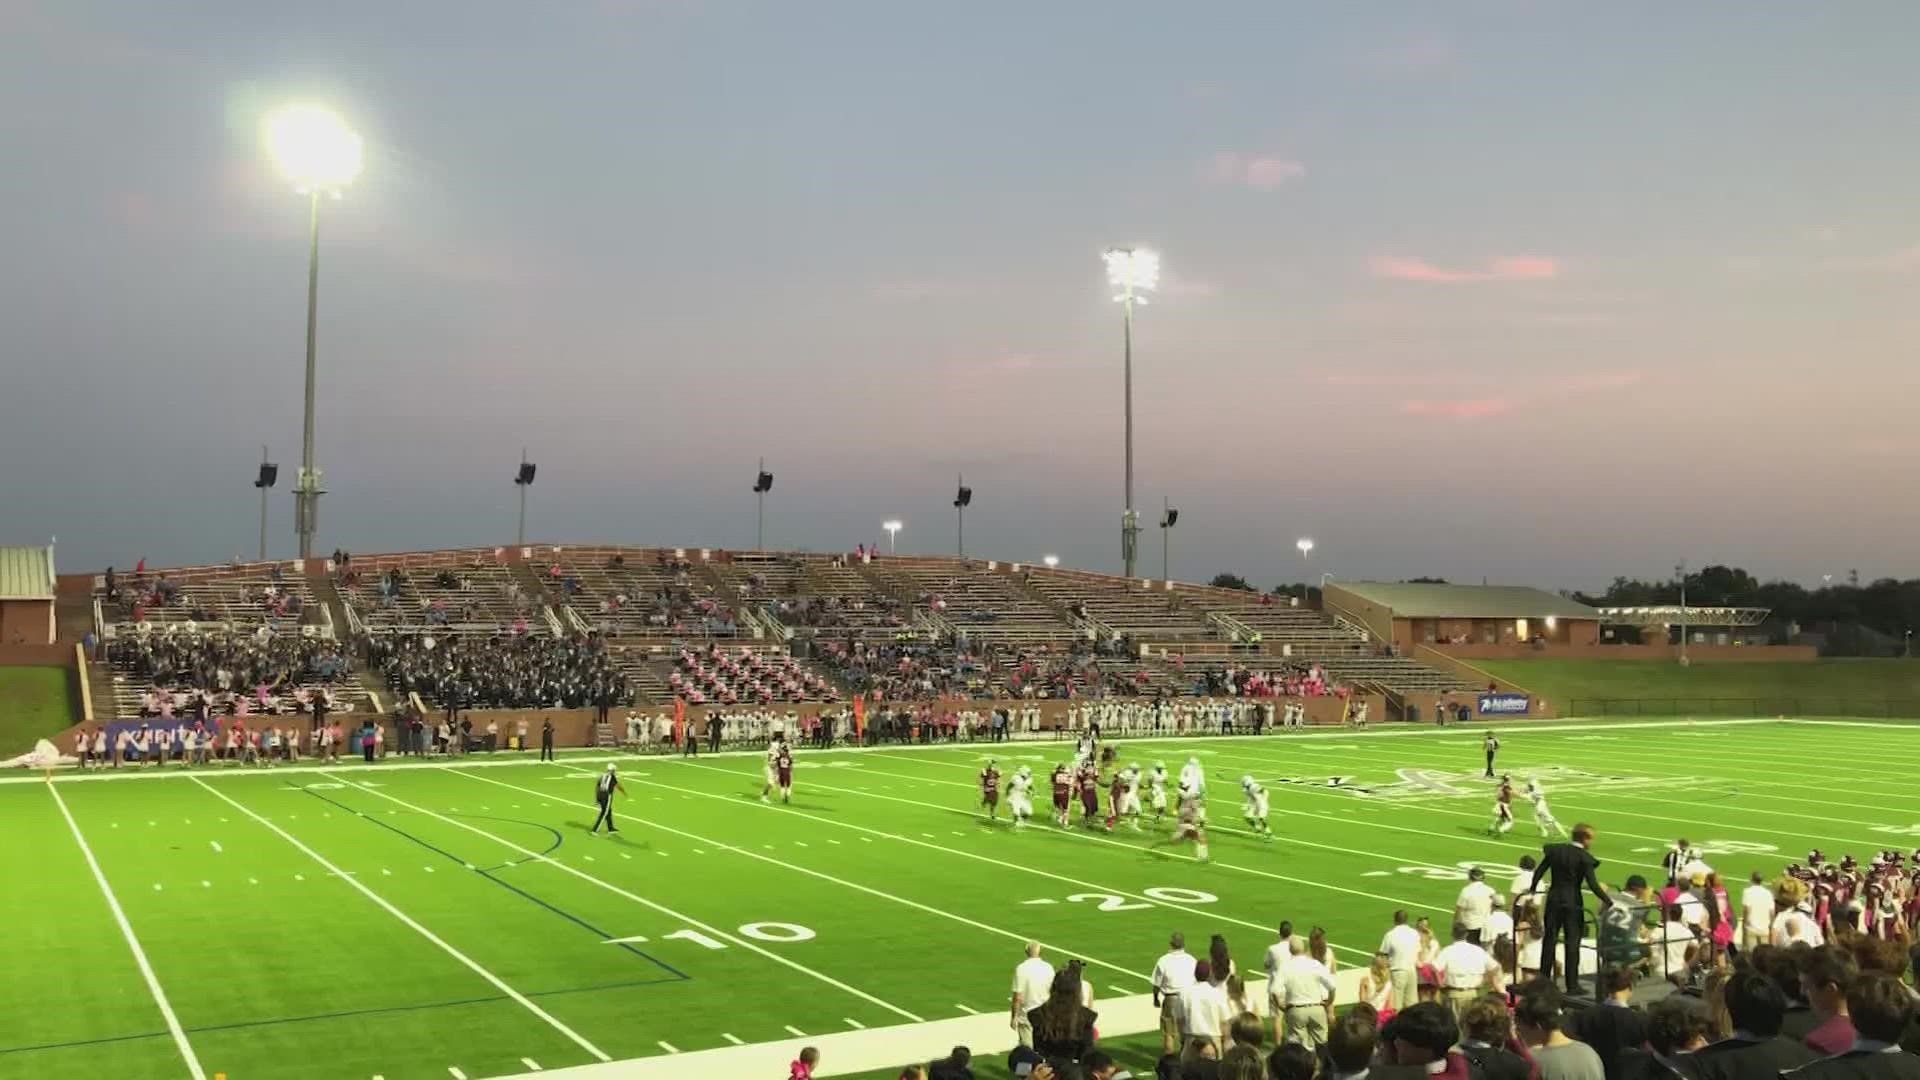 Katy ISD's Paetow High School had their first football game without their head coach since he resigned earlier this week amid a misconduct investigation.